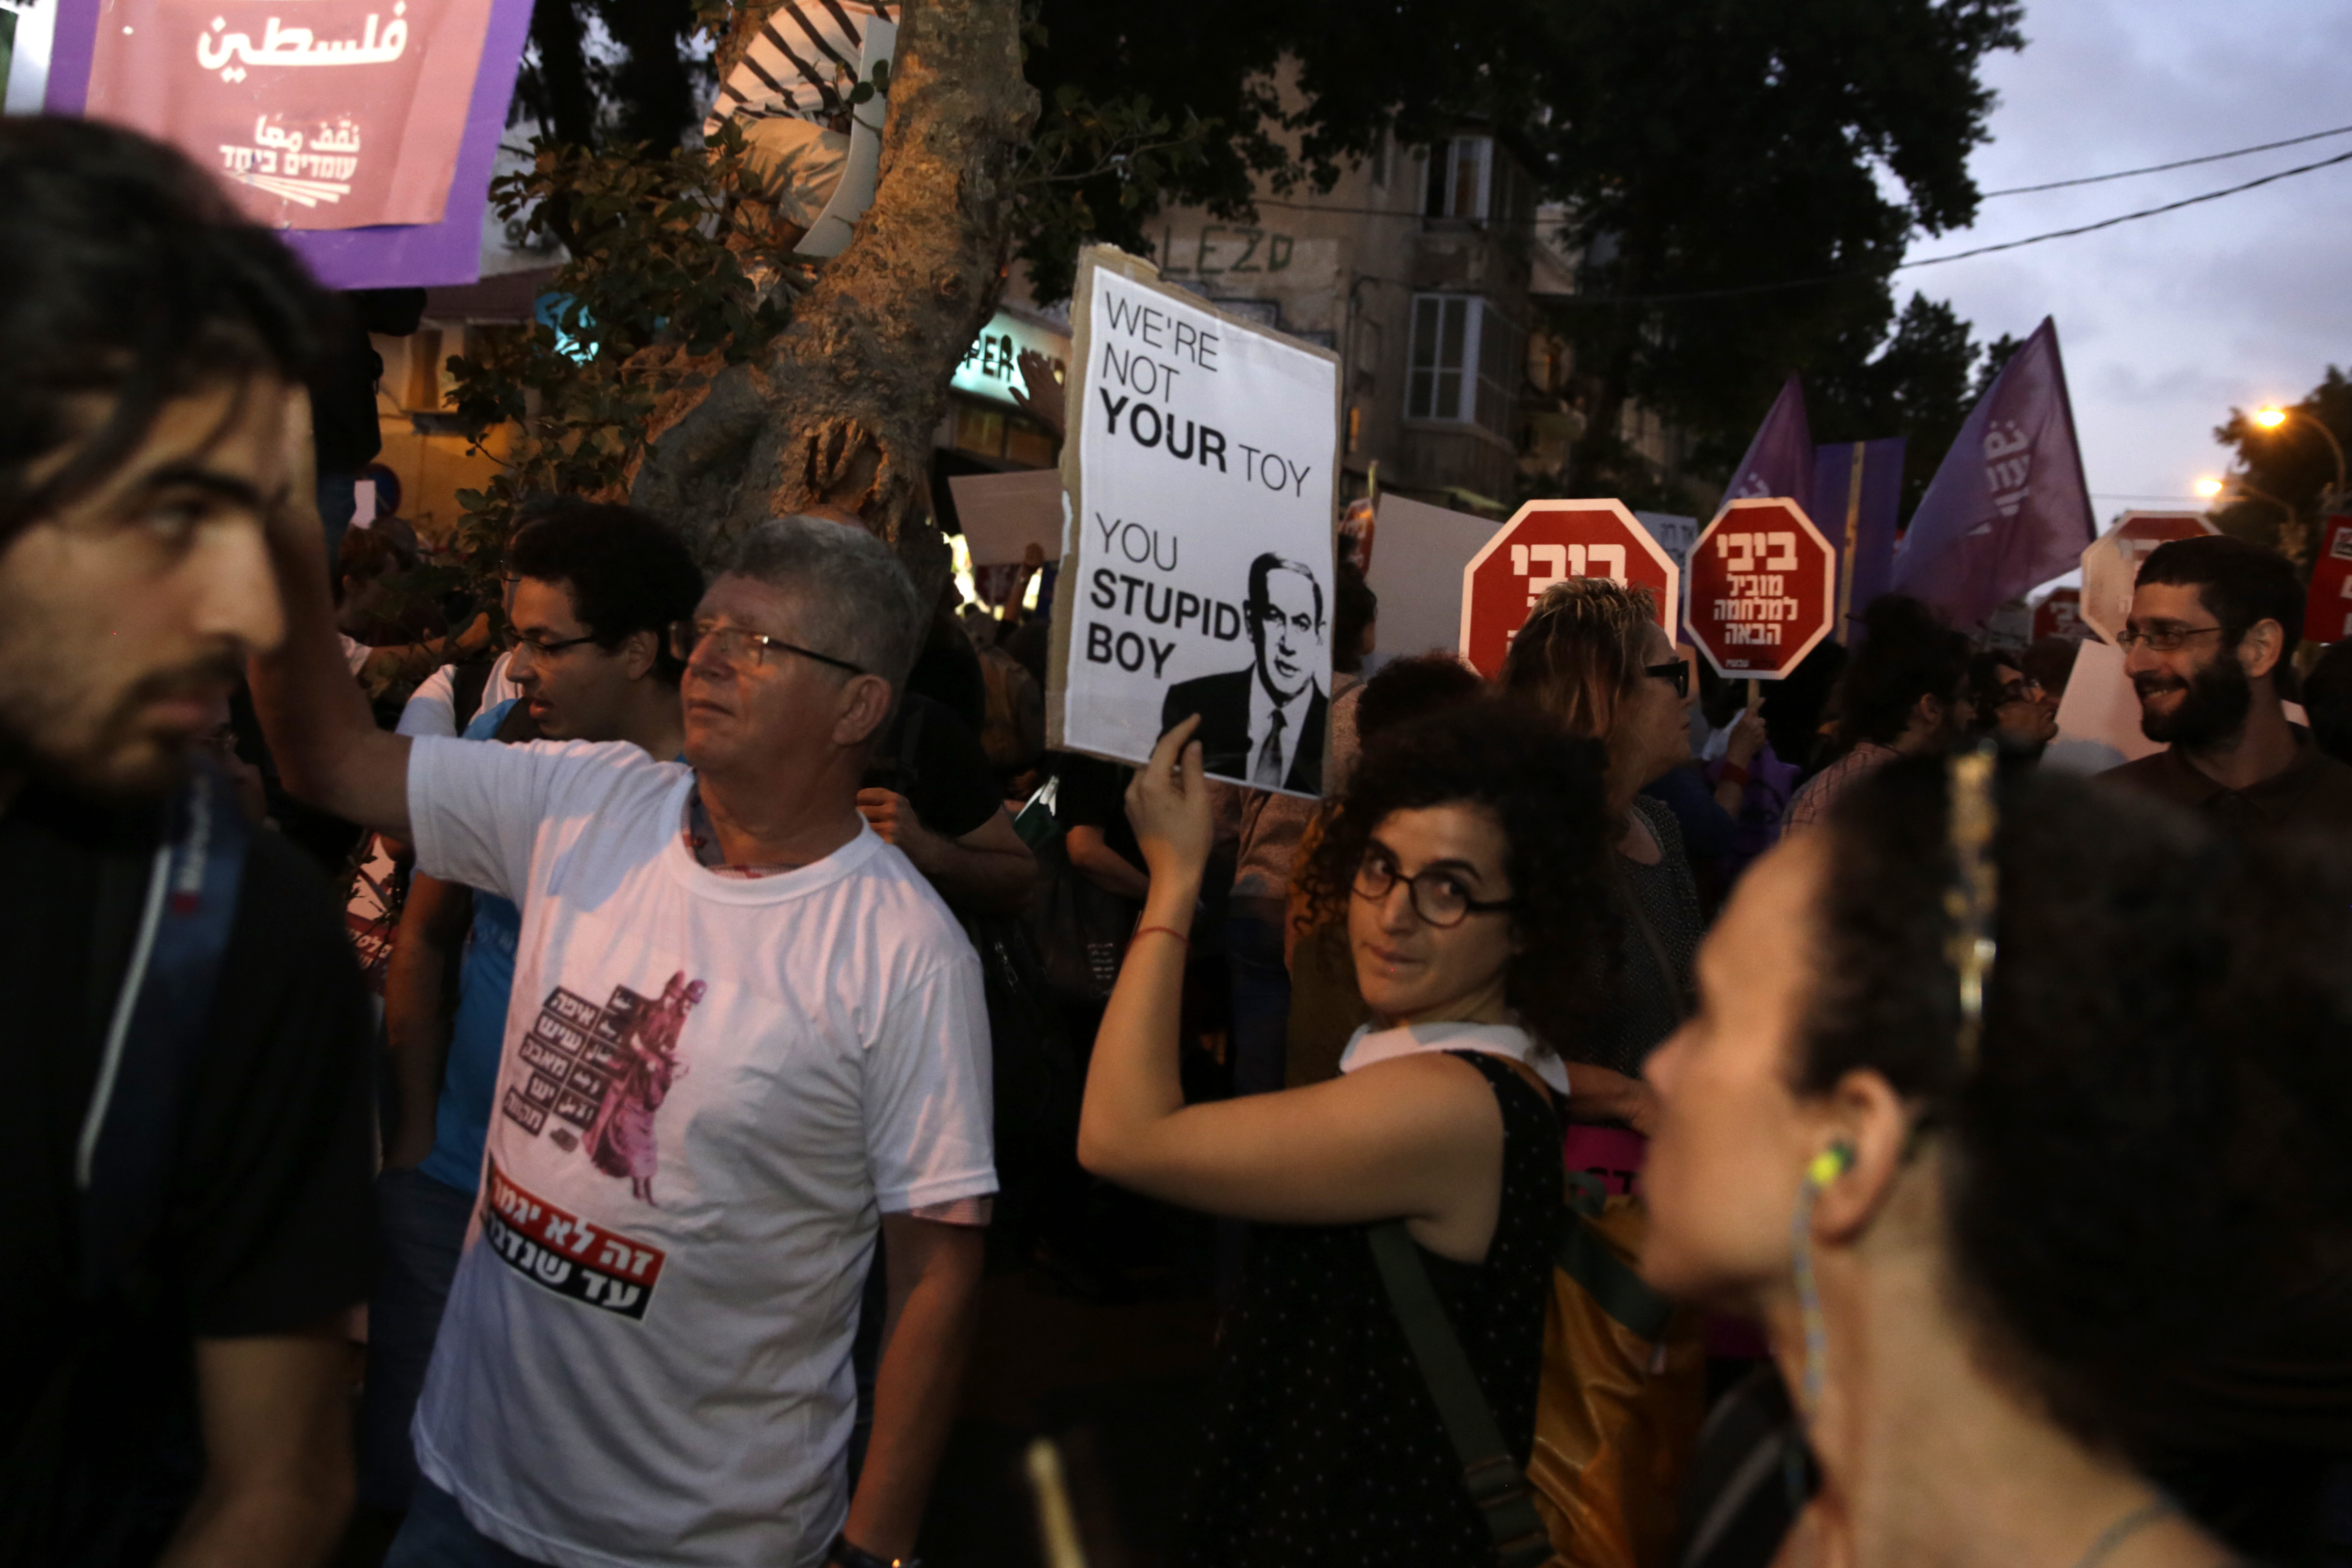 Left wing Israelis hold signs during a demonstration against the situation in Gaza in Tel Aviv, Tuesday, May 15, 2018. Israel faced a growing backlash Tuesday and new charges of using excessive force, a day after Israeli troops firing from across a border fence killed 59 Palestinians and wounded more than 2,700 at a mass protest in Gaza. (AP Photo/Sebastian Scheiner)